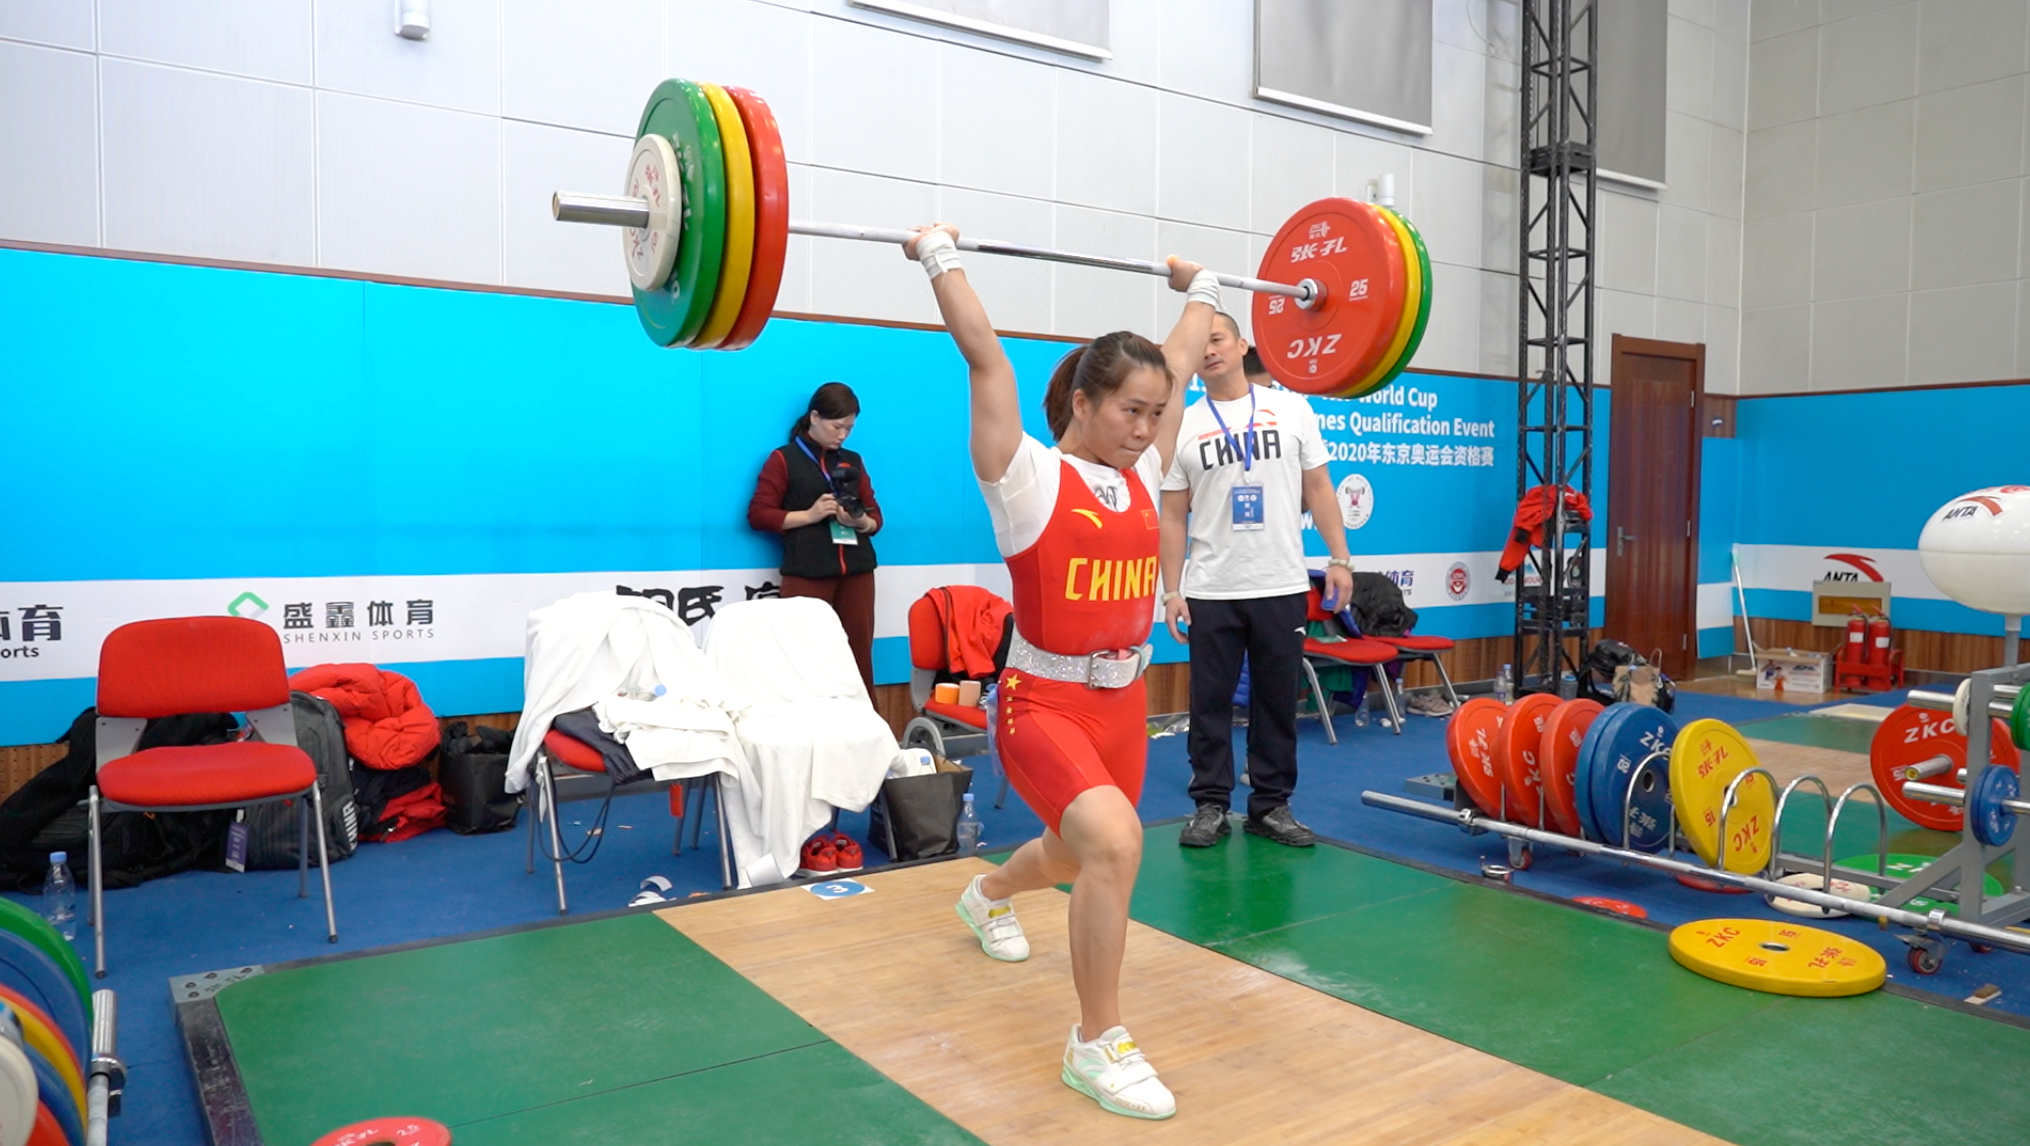 Female Athlete in Olympic Weightlifting & Program